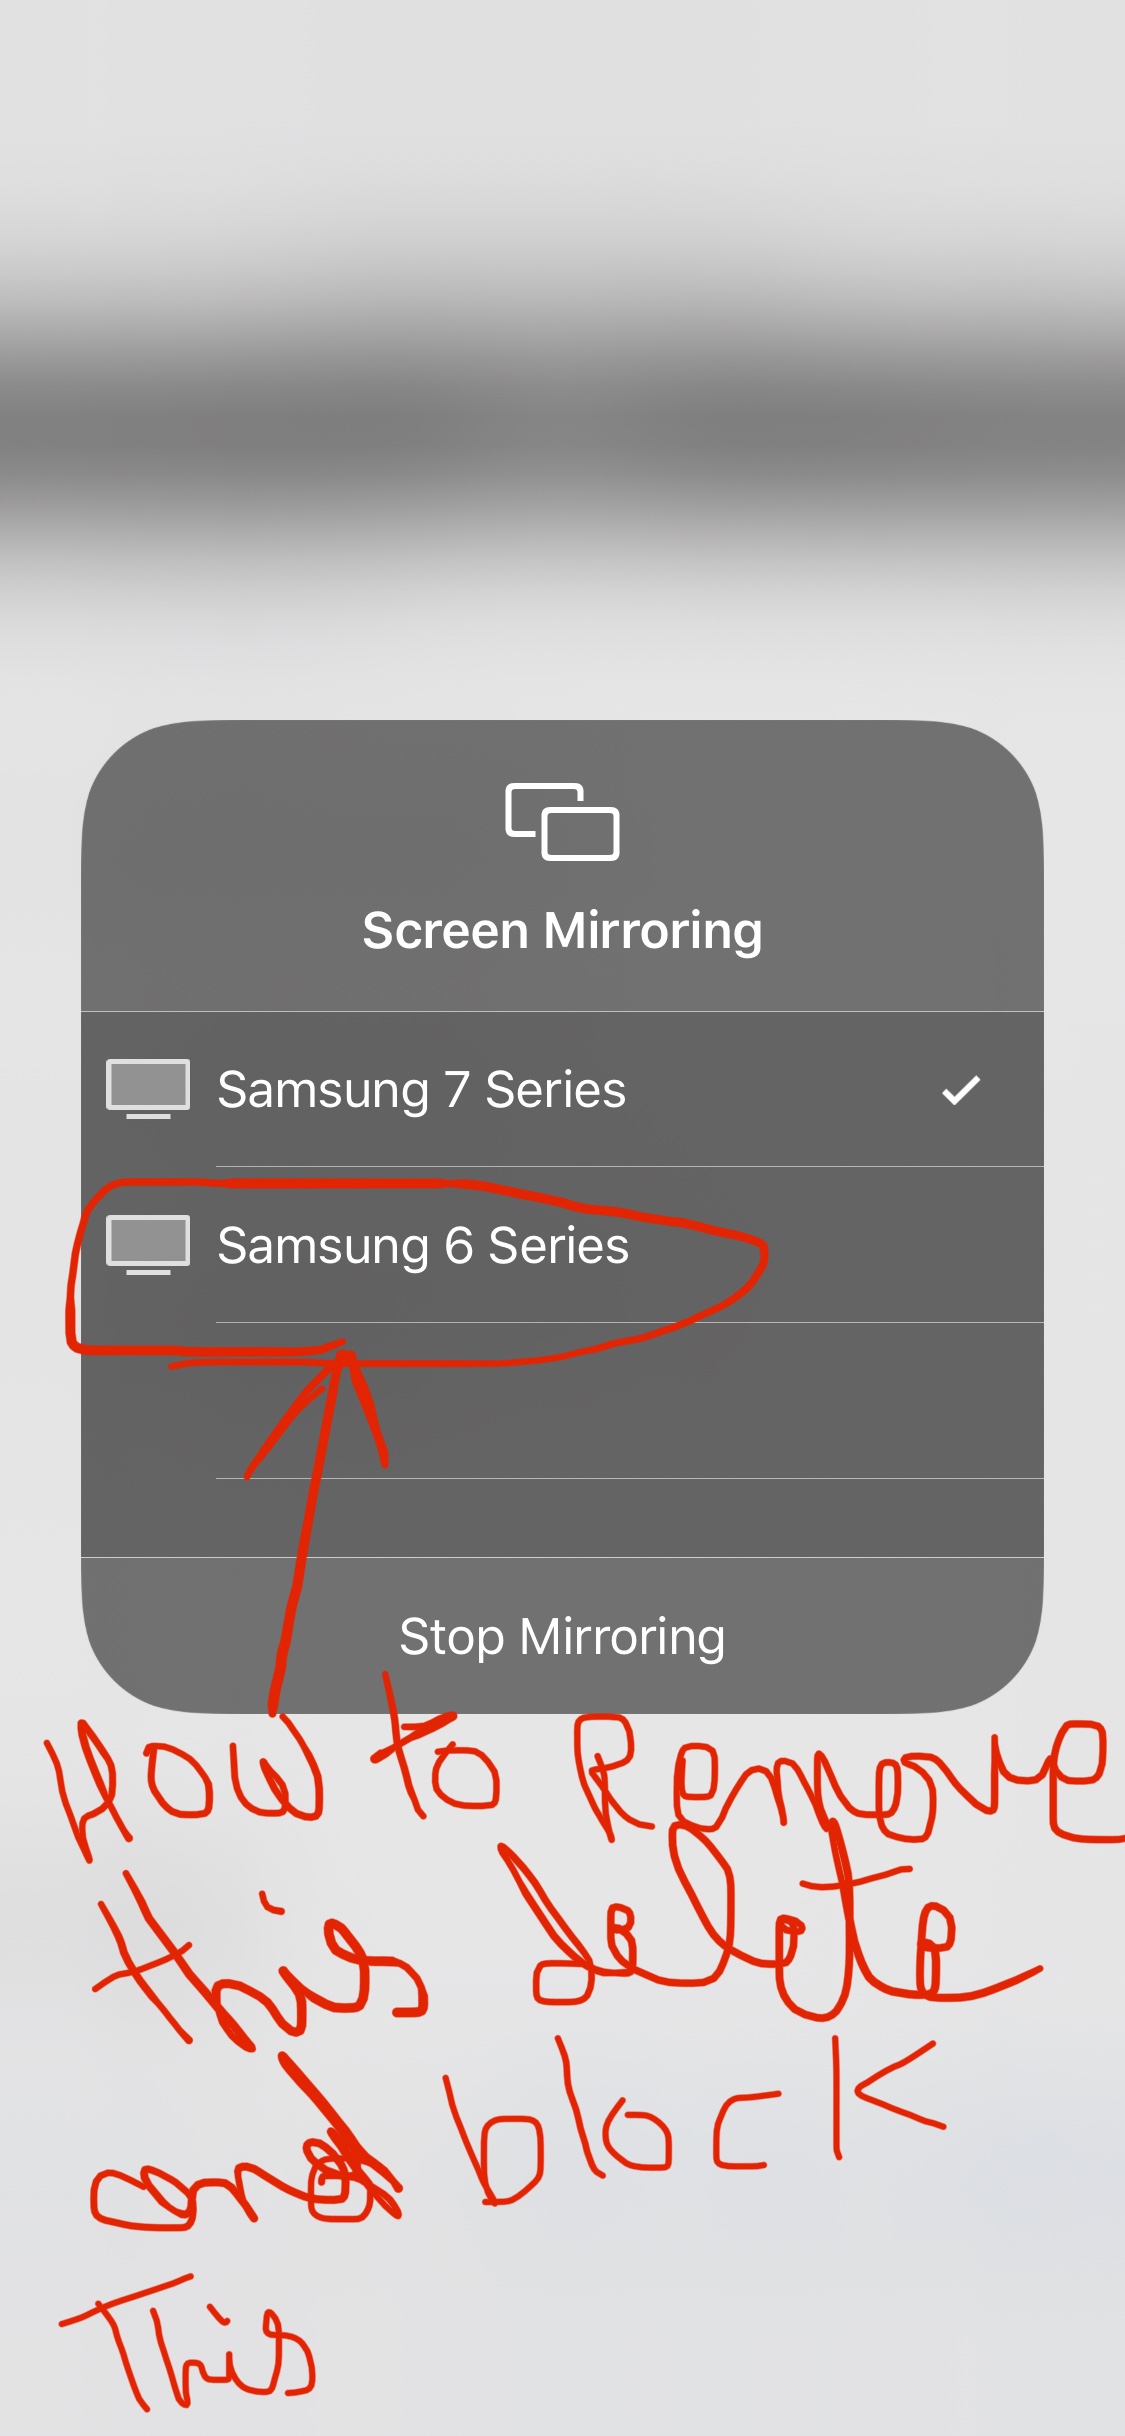 How To Remove Samsung Tv From Iphone, How To Delete Screen Mirroring On Ipad